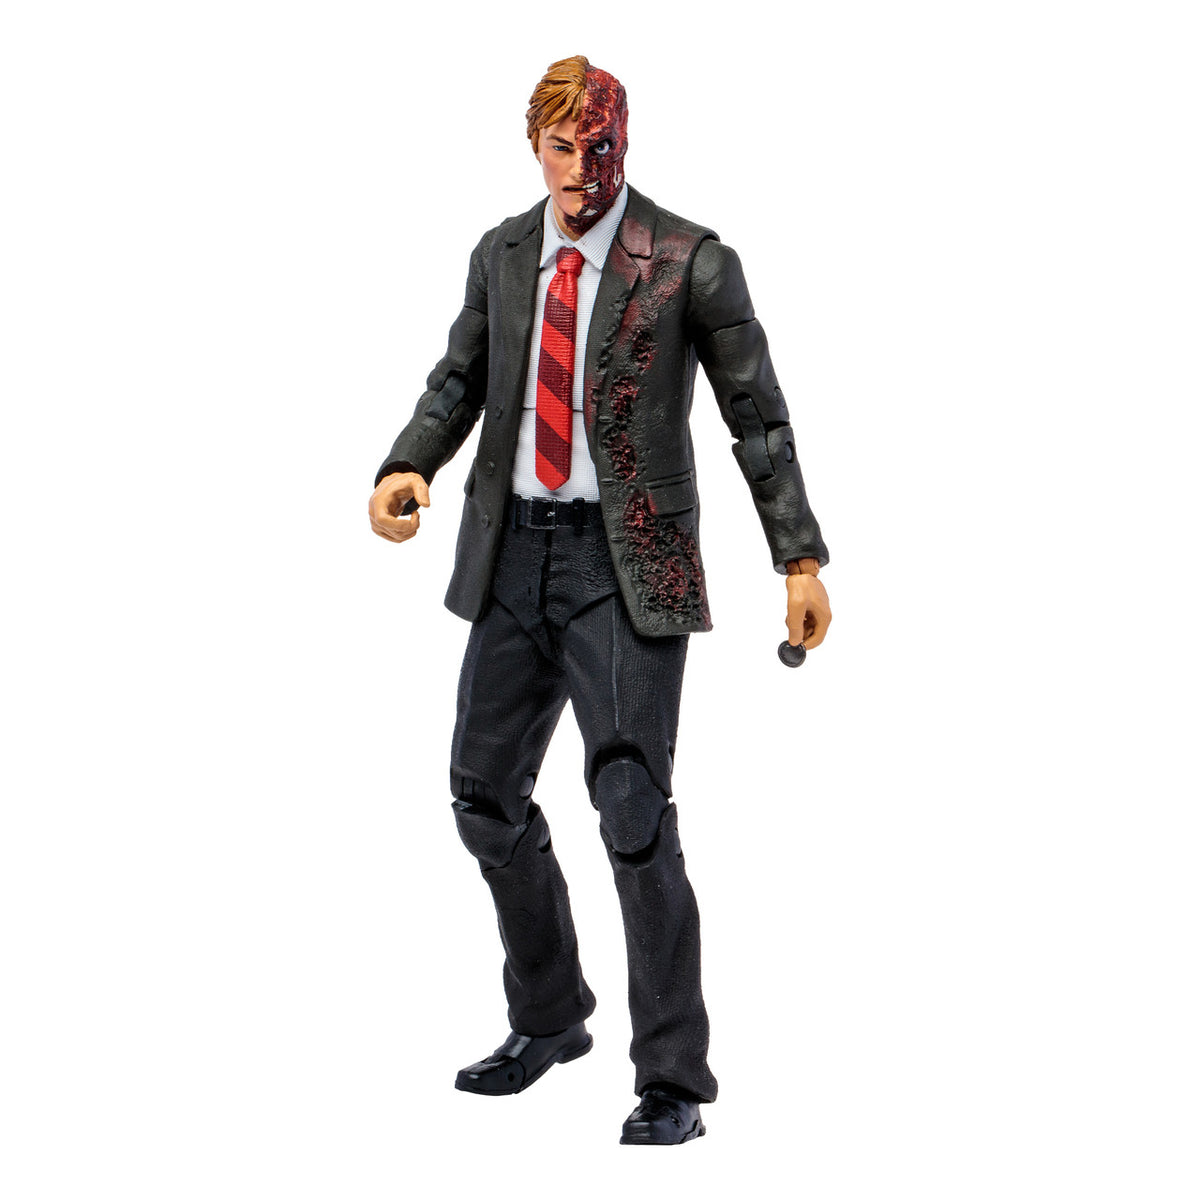 Two-Face (The Dark Knight Trilogy) 7&quot; Build-A-Figure Bane Series Action Figure by McFarlane Toys -McFarlane Toys - India - www.superherotoystore.com